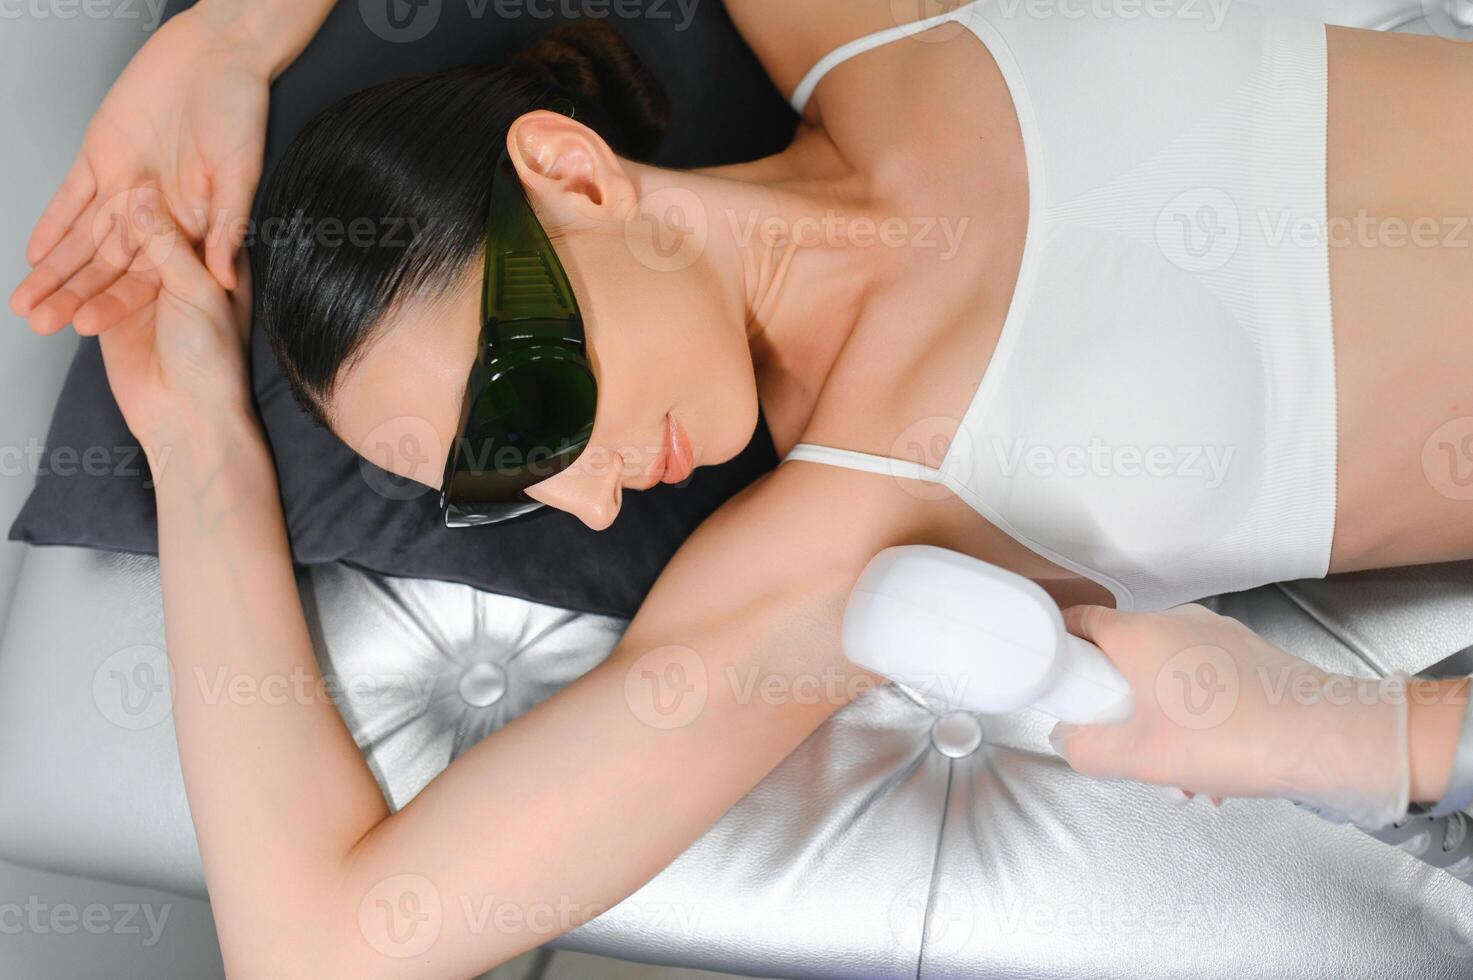 Woman getting laser treatment on her armpit in a beauty salon, close up photo